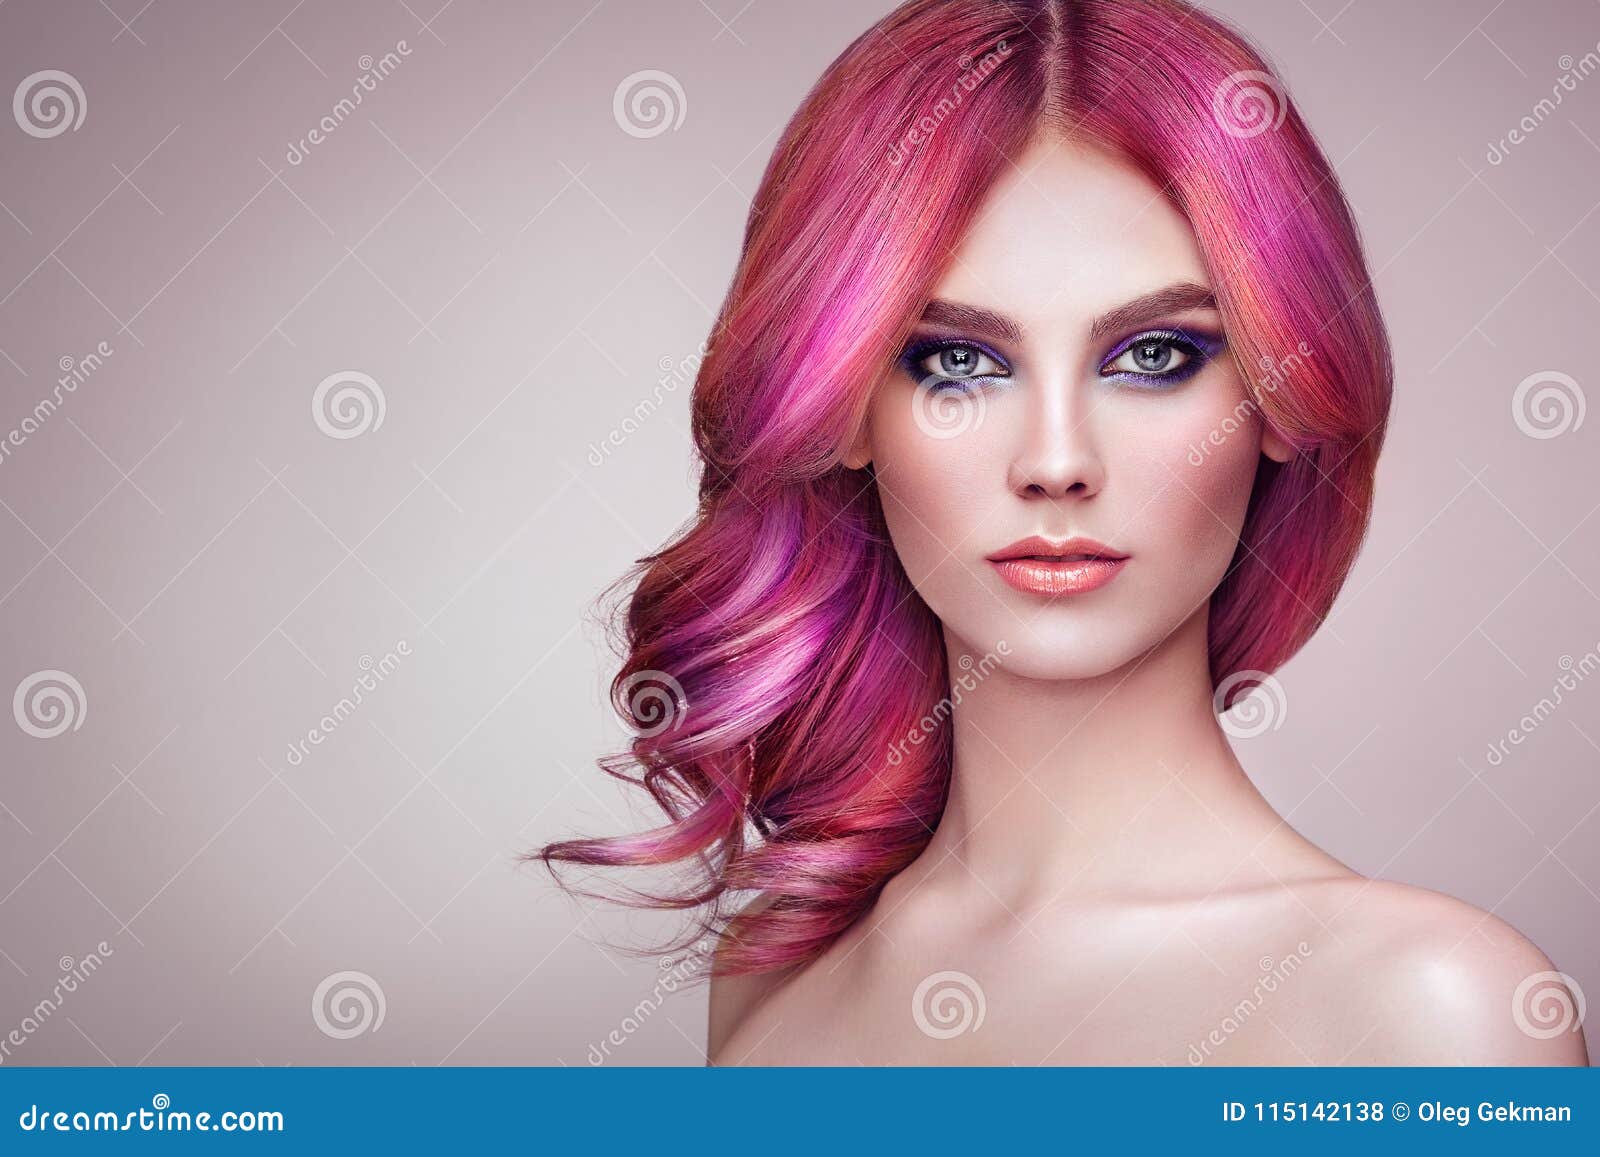 Beauty Fashion Model Girl with Colorful Dyed Hair Stock Photo - Image of  hair, elegant: 115142138